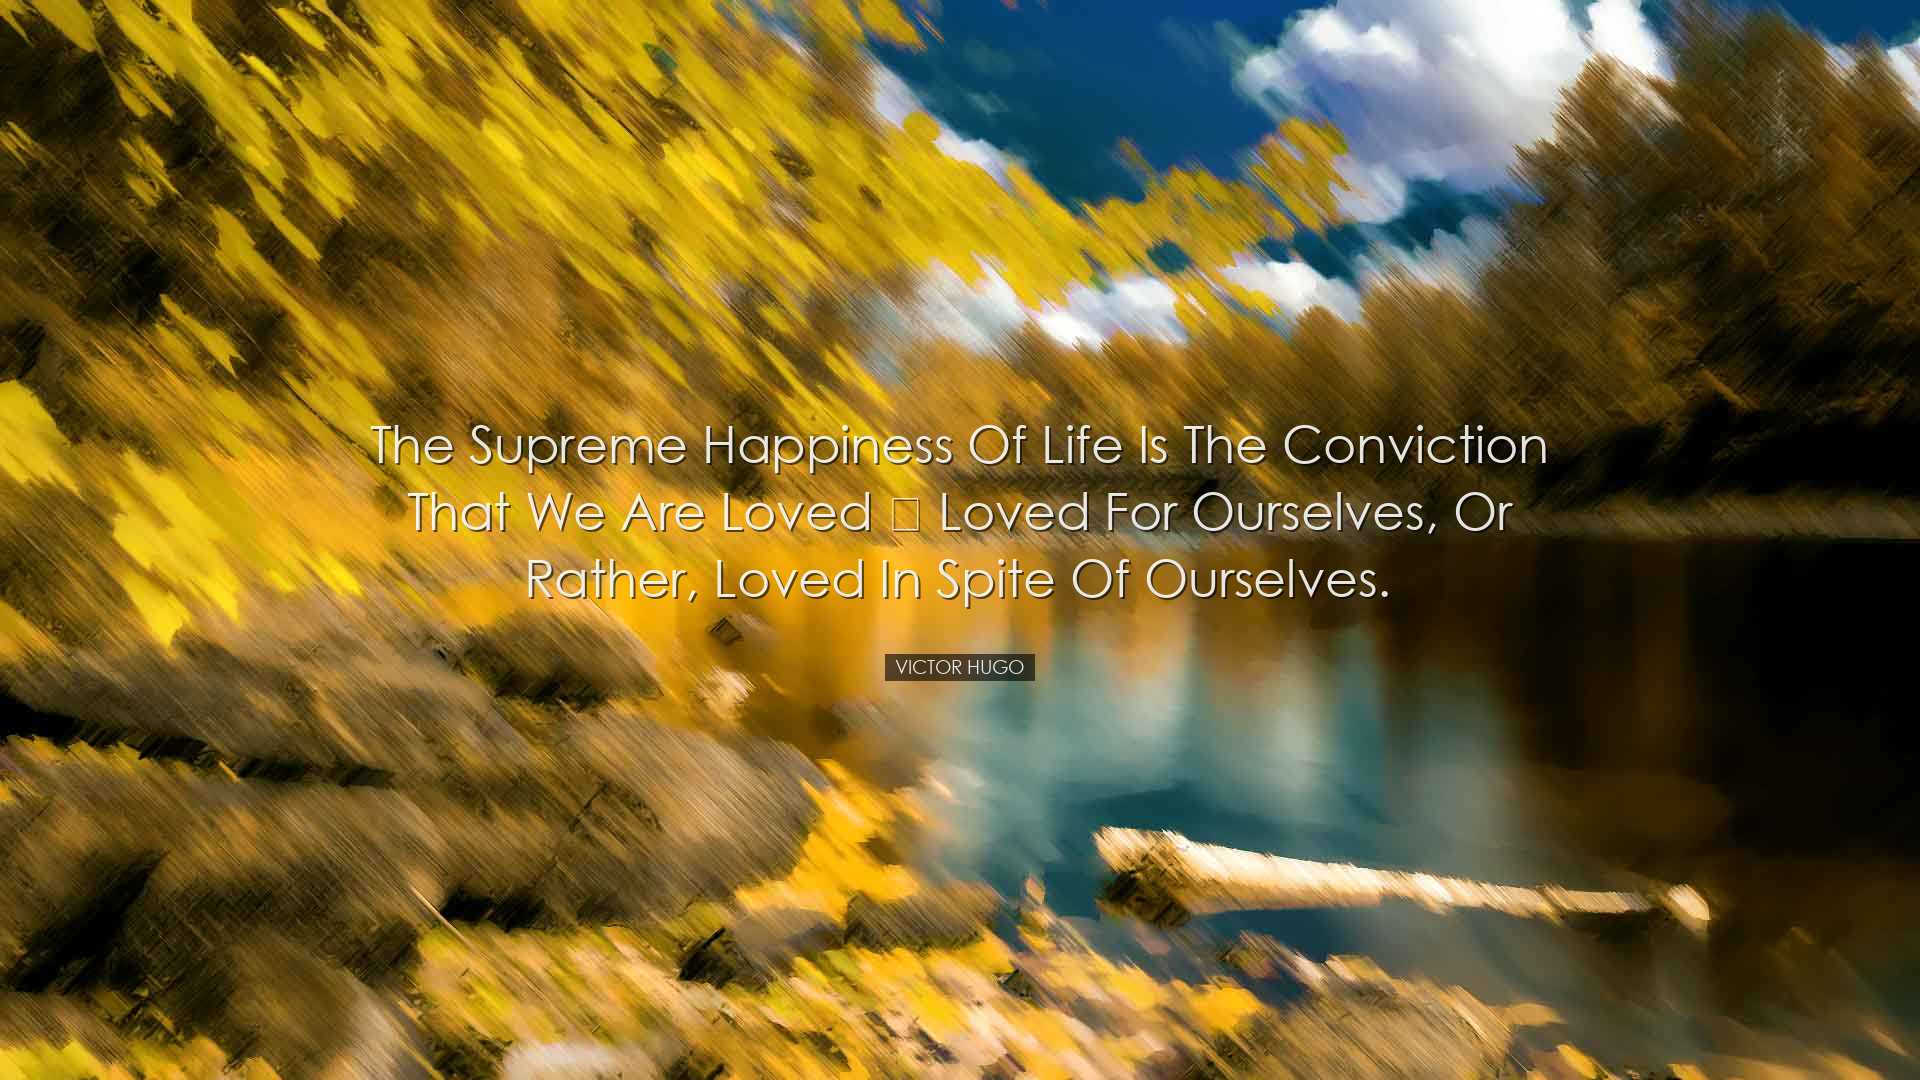 The supreme happiness of life is the conviction that we are loved